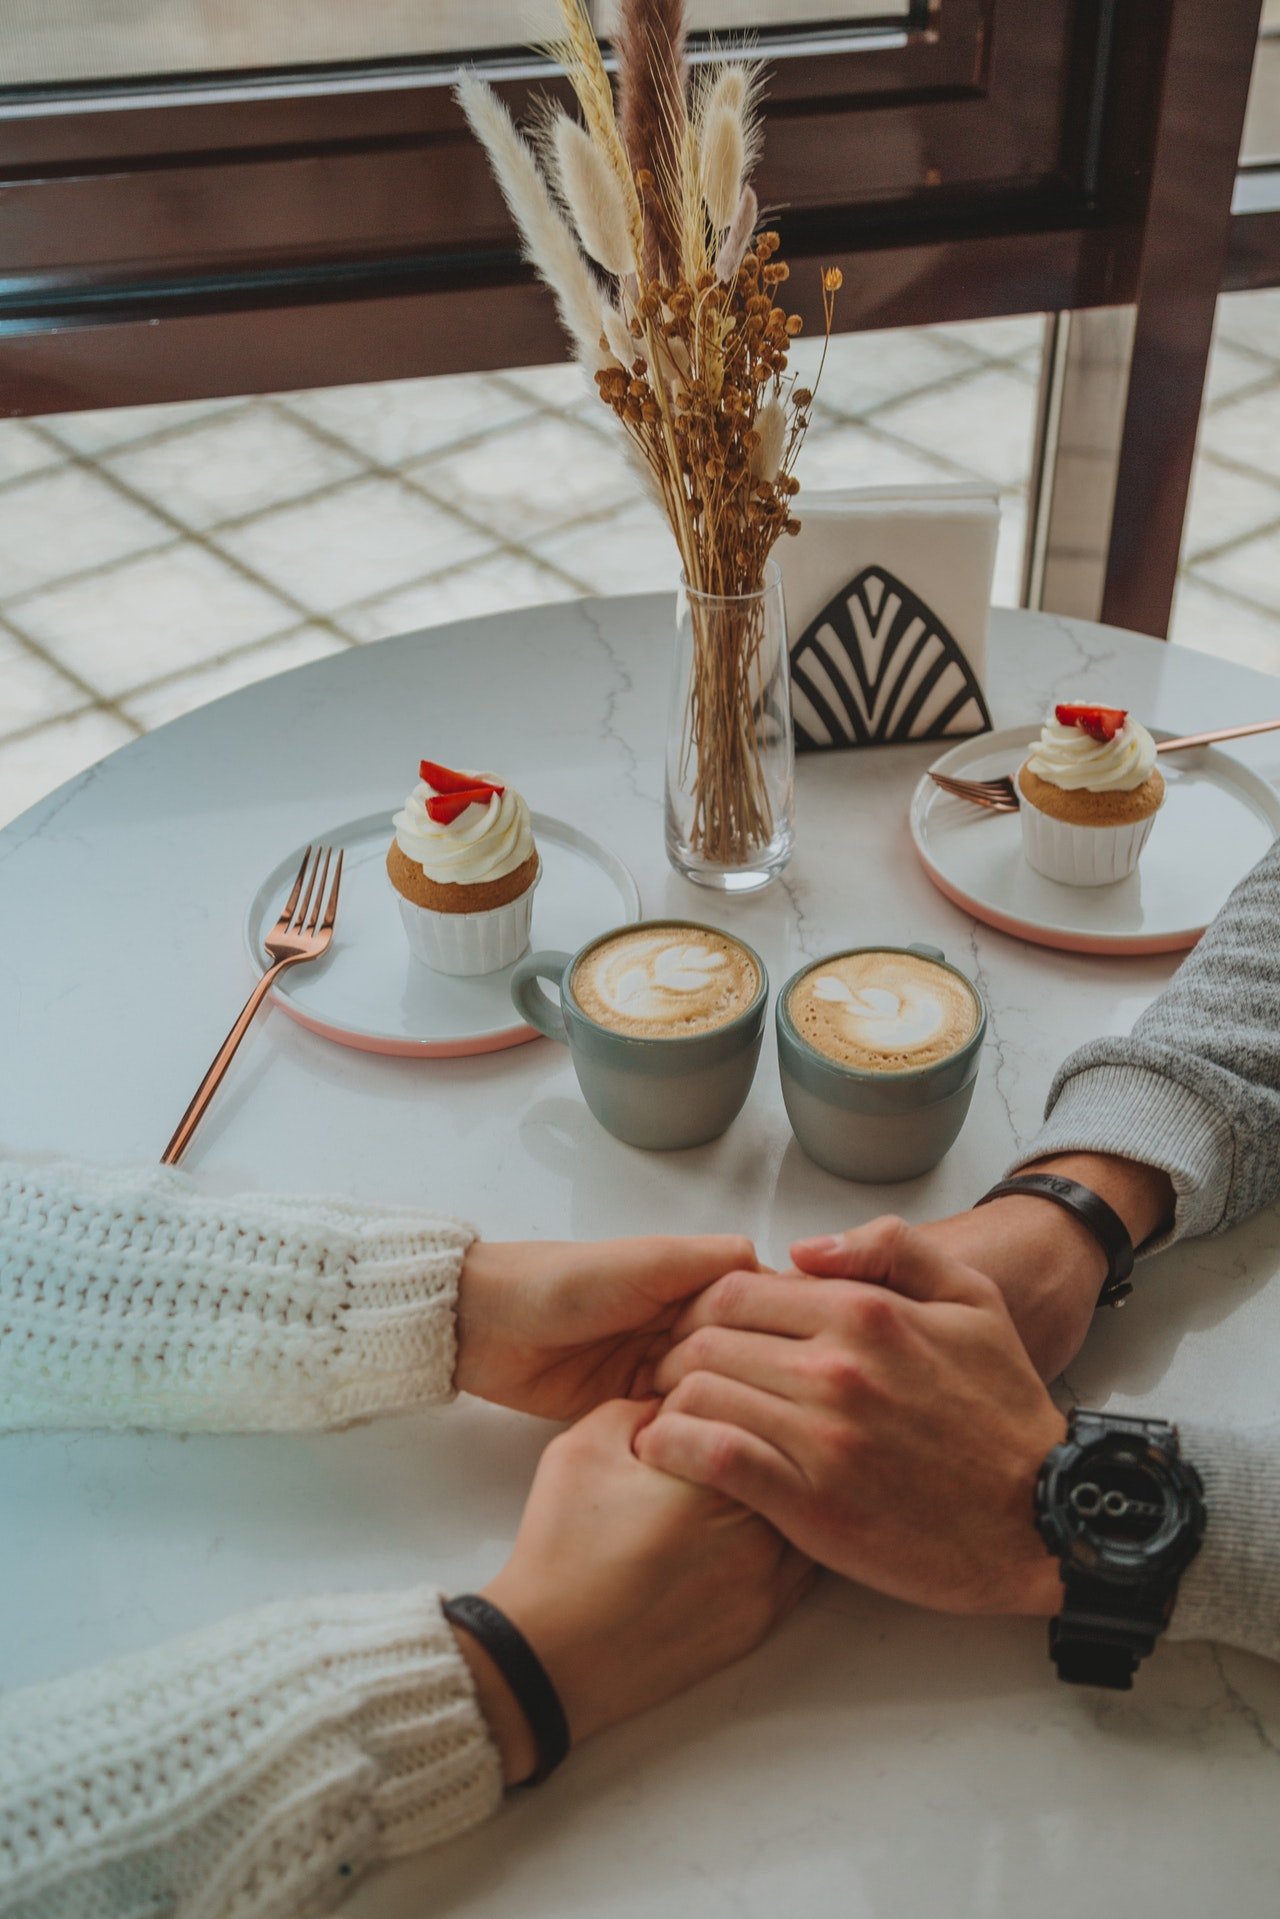 Jared and I went for coffee, and eventually, fell in love. | Source: Pexels